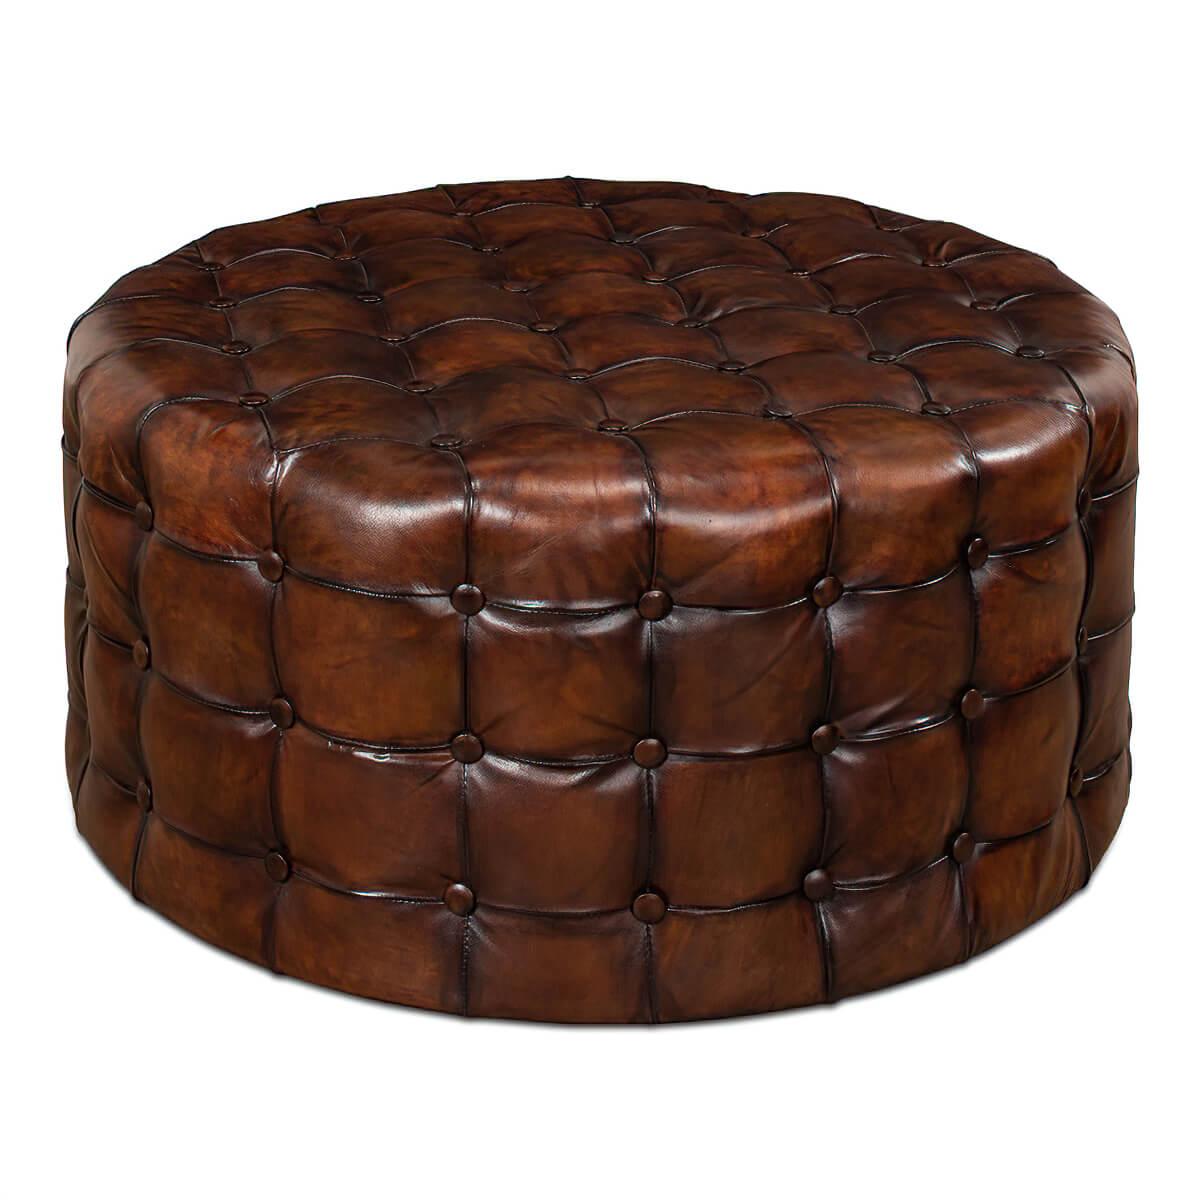 Tufted leather round ottoman with antiqued brown full-grain leather.

Dimensions: 36